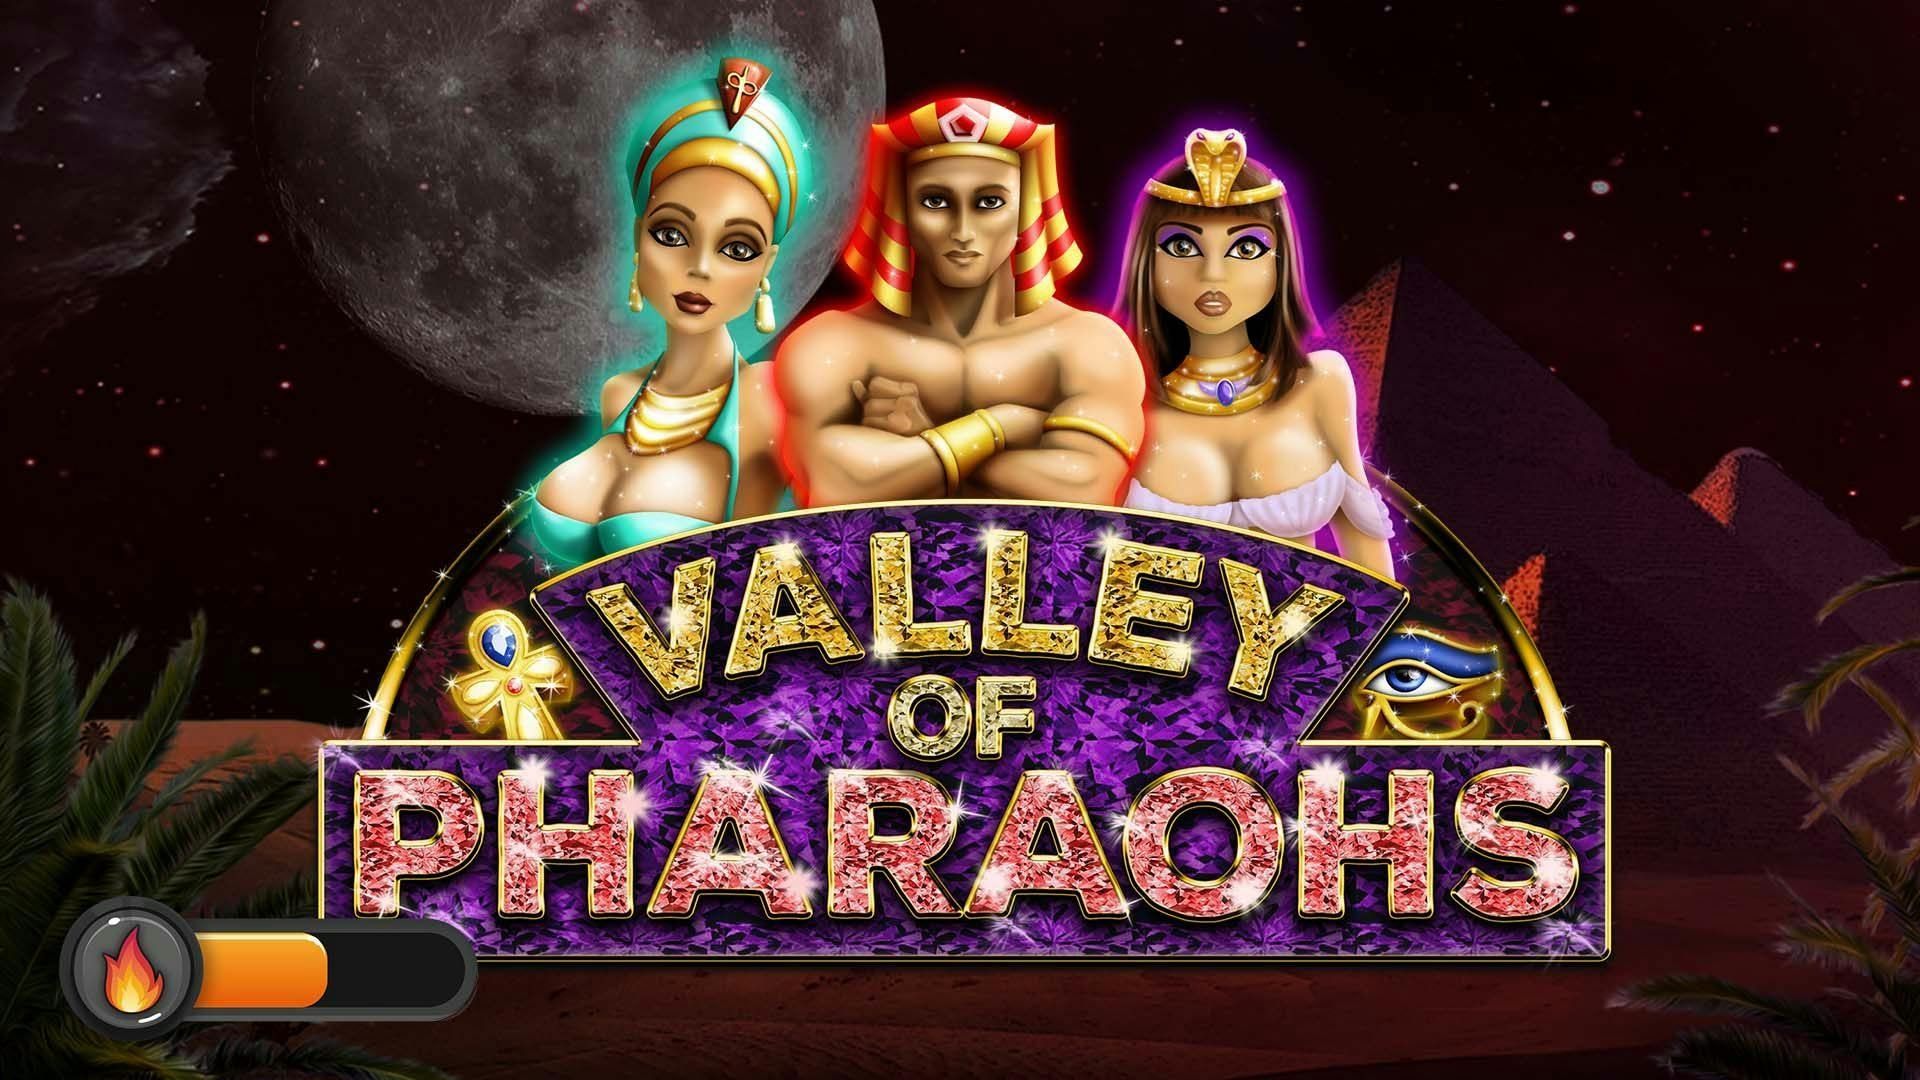 Valley Of Pharaohs Slot Machine Online Free Game Play